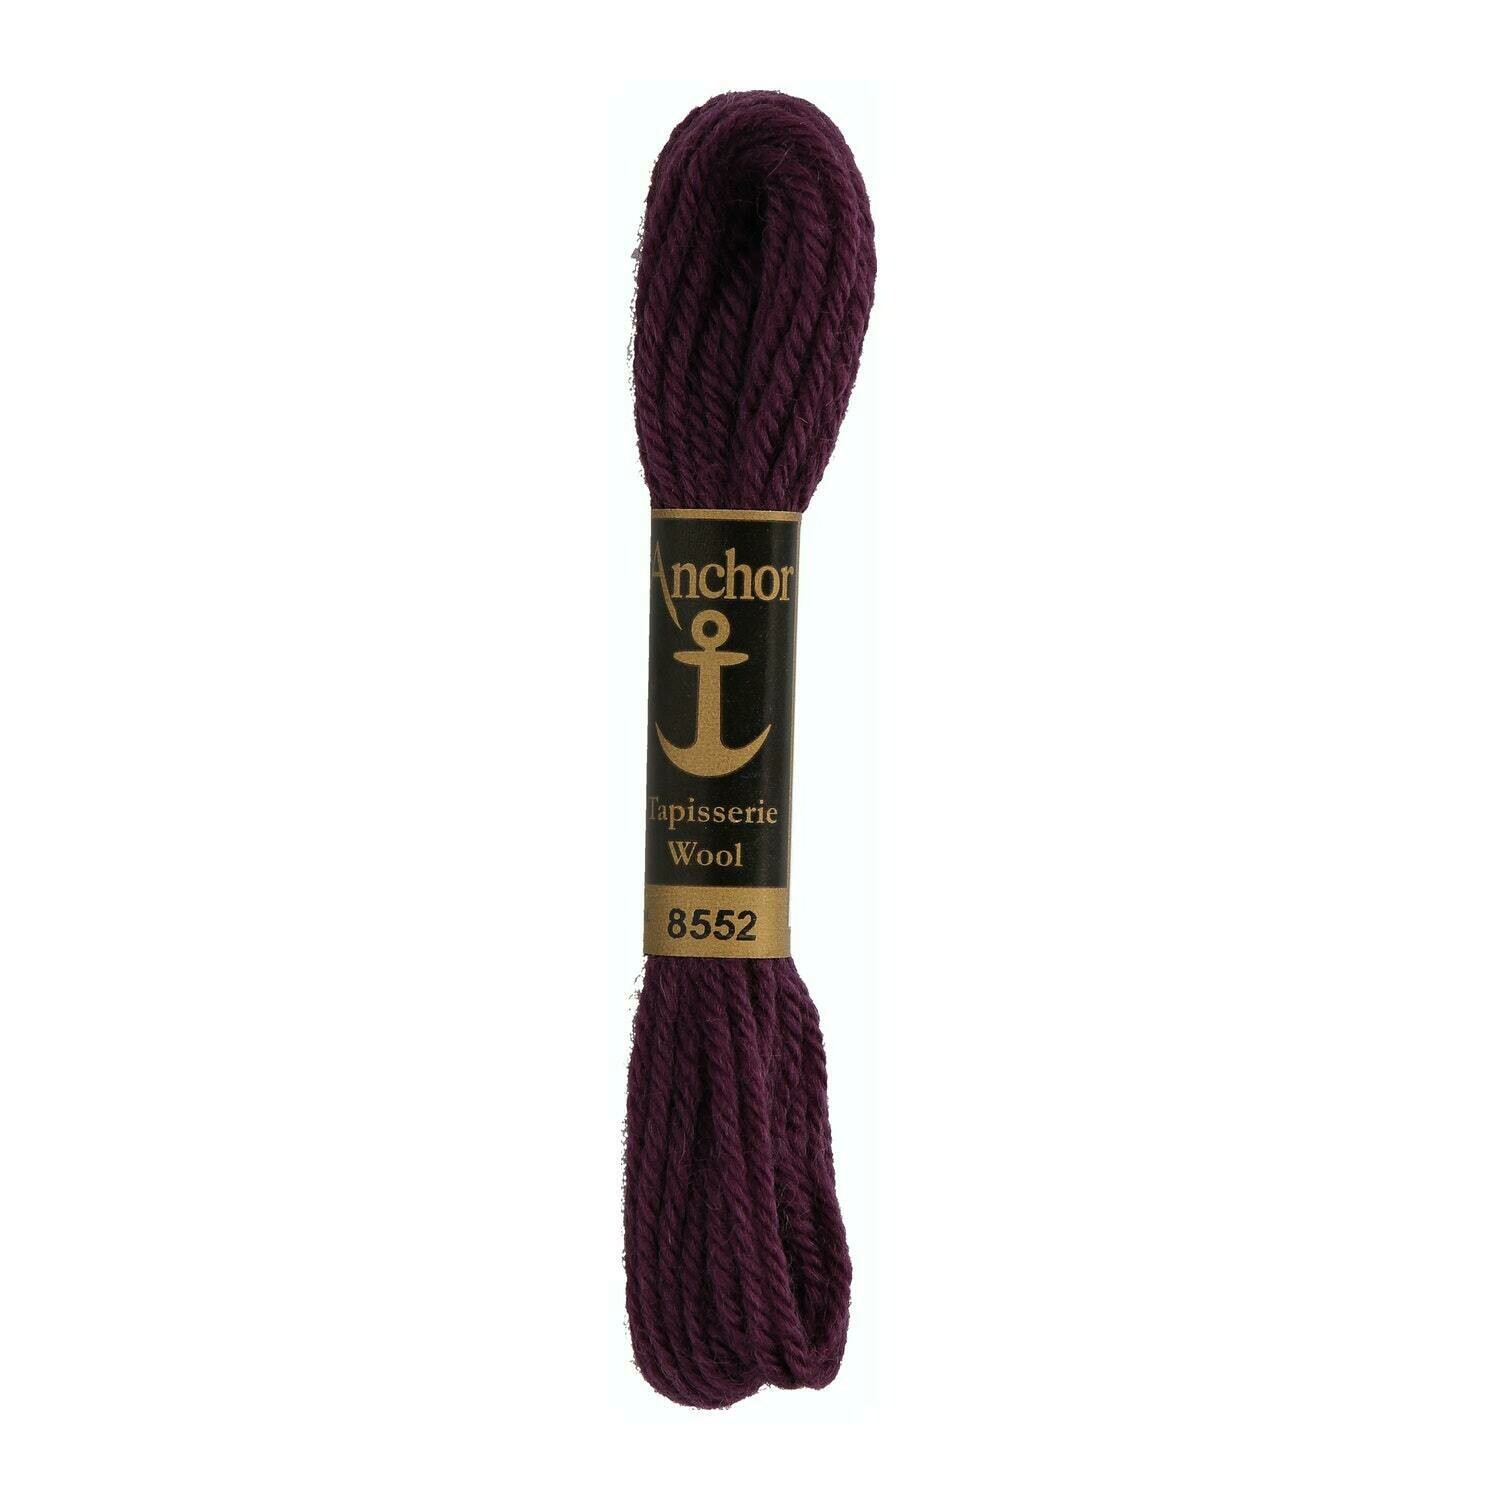 Anchor Tapisserie Wool #08552